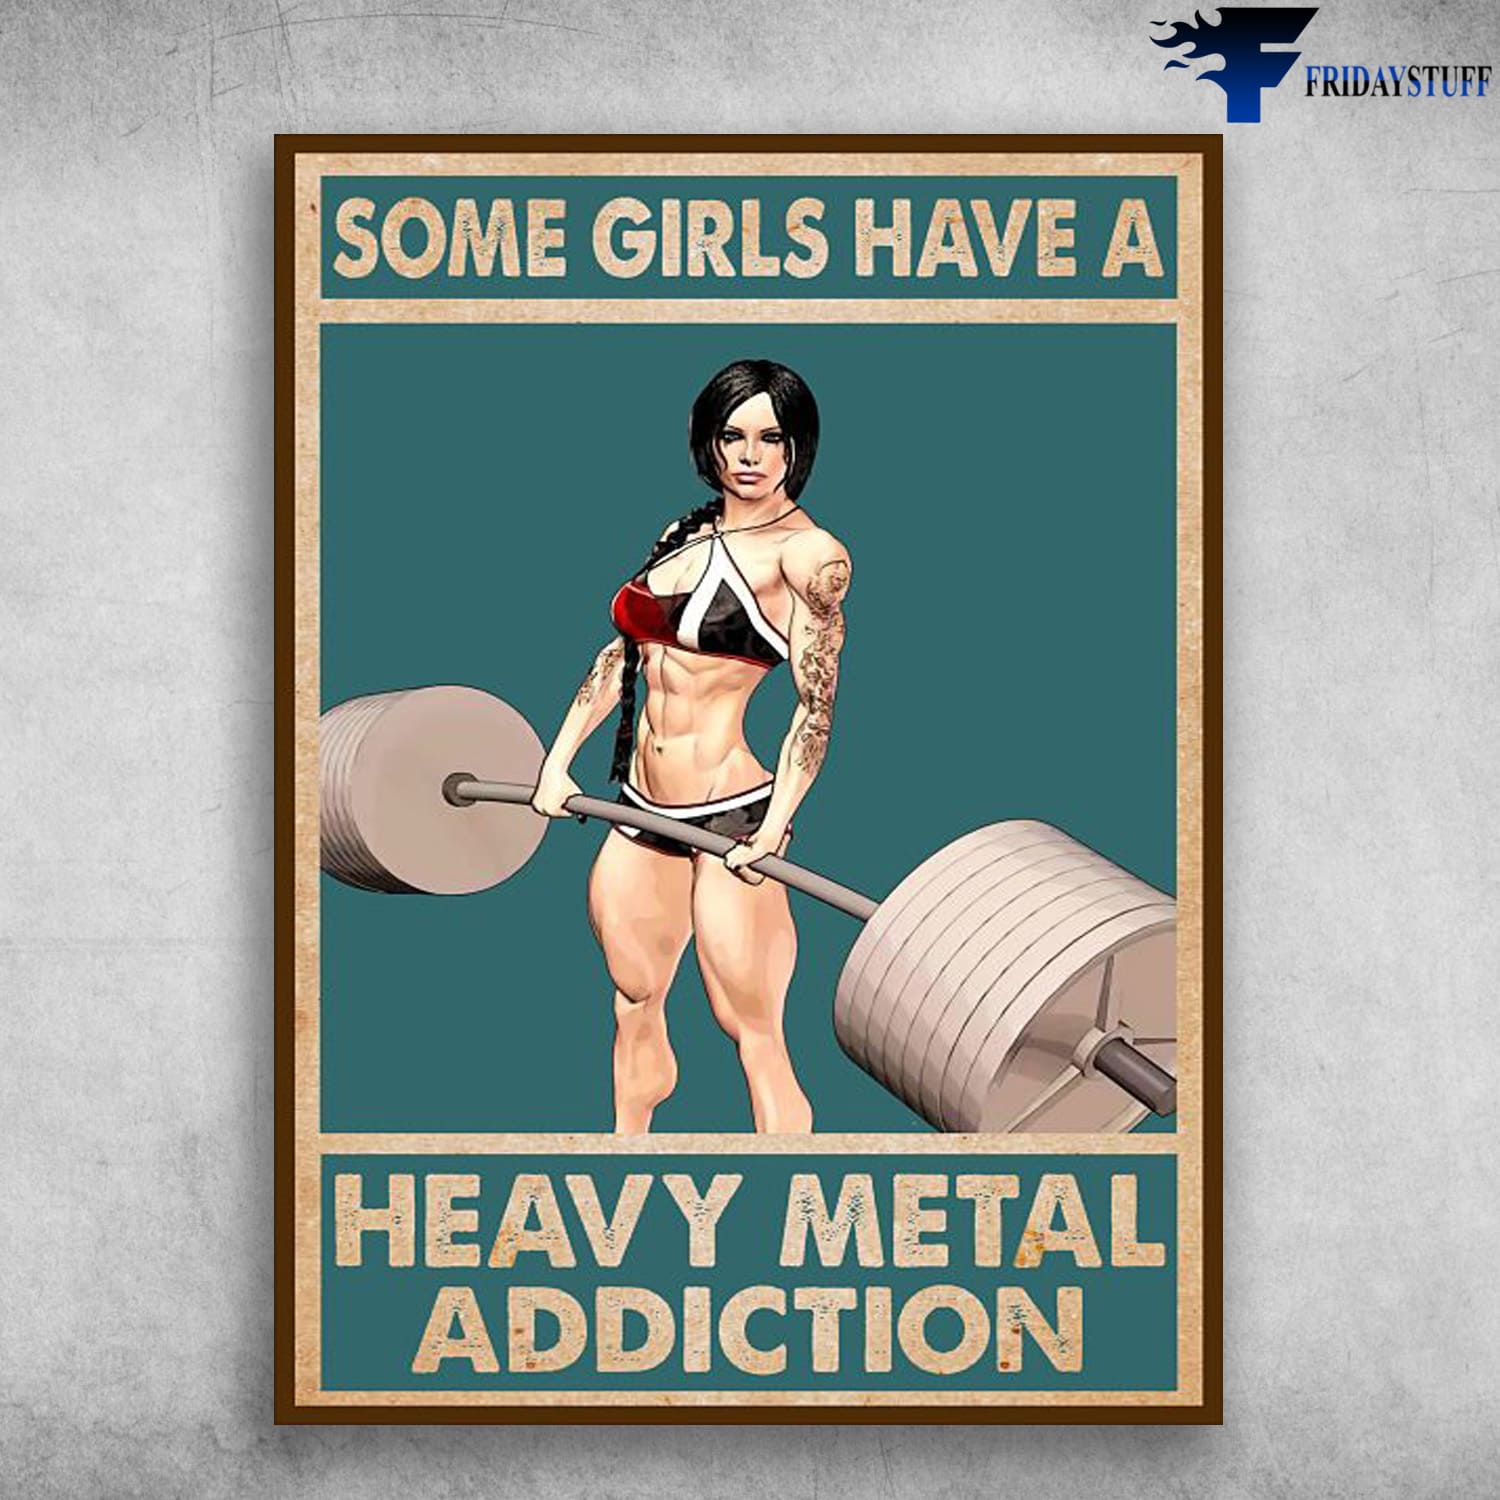 Weightlifting Girl, Gym Poster, Some Girls Have A Heavy Metal Addiction